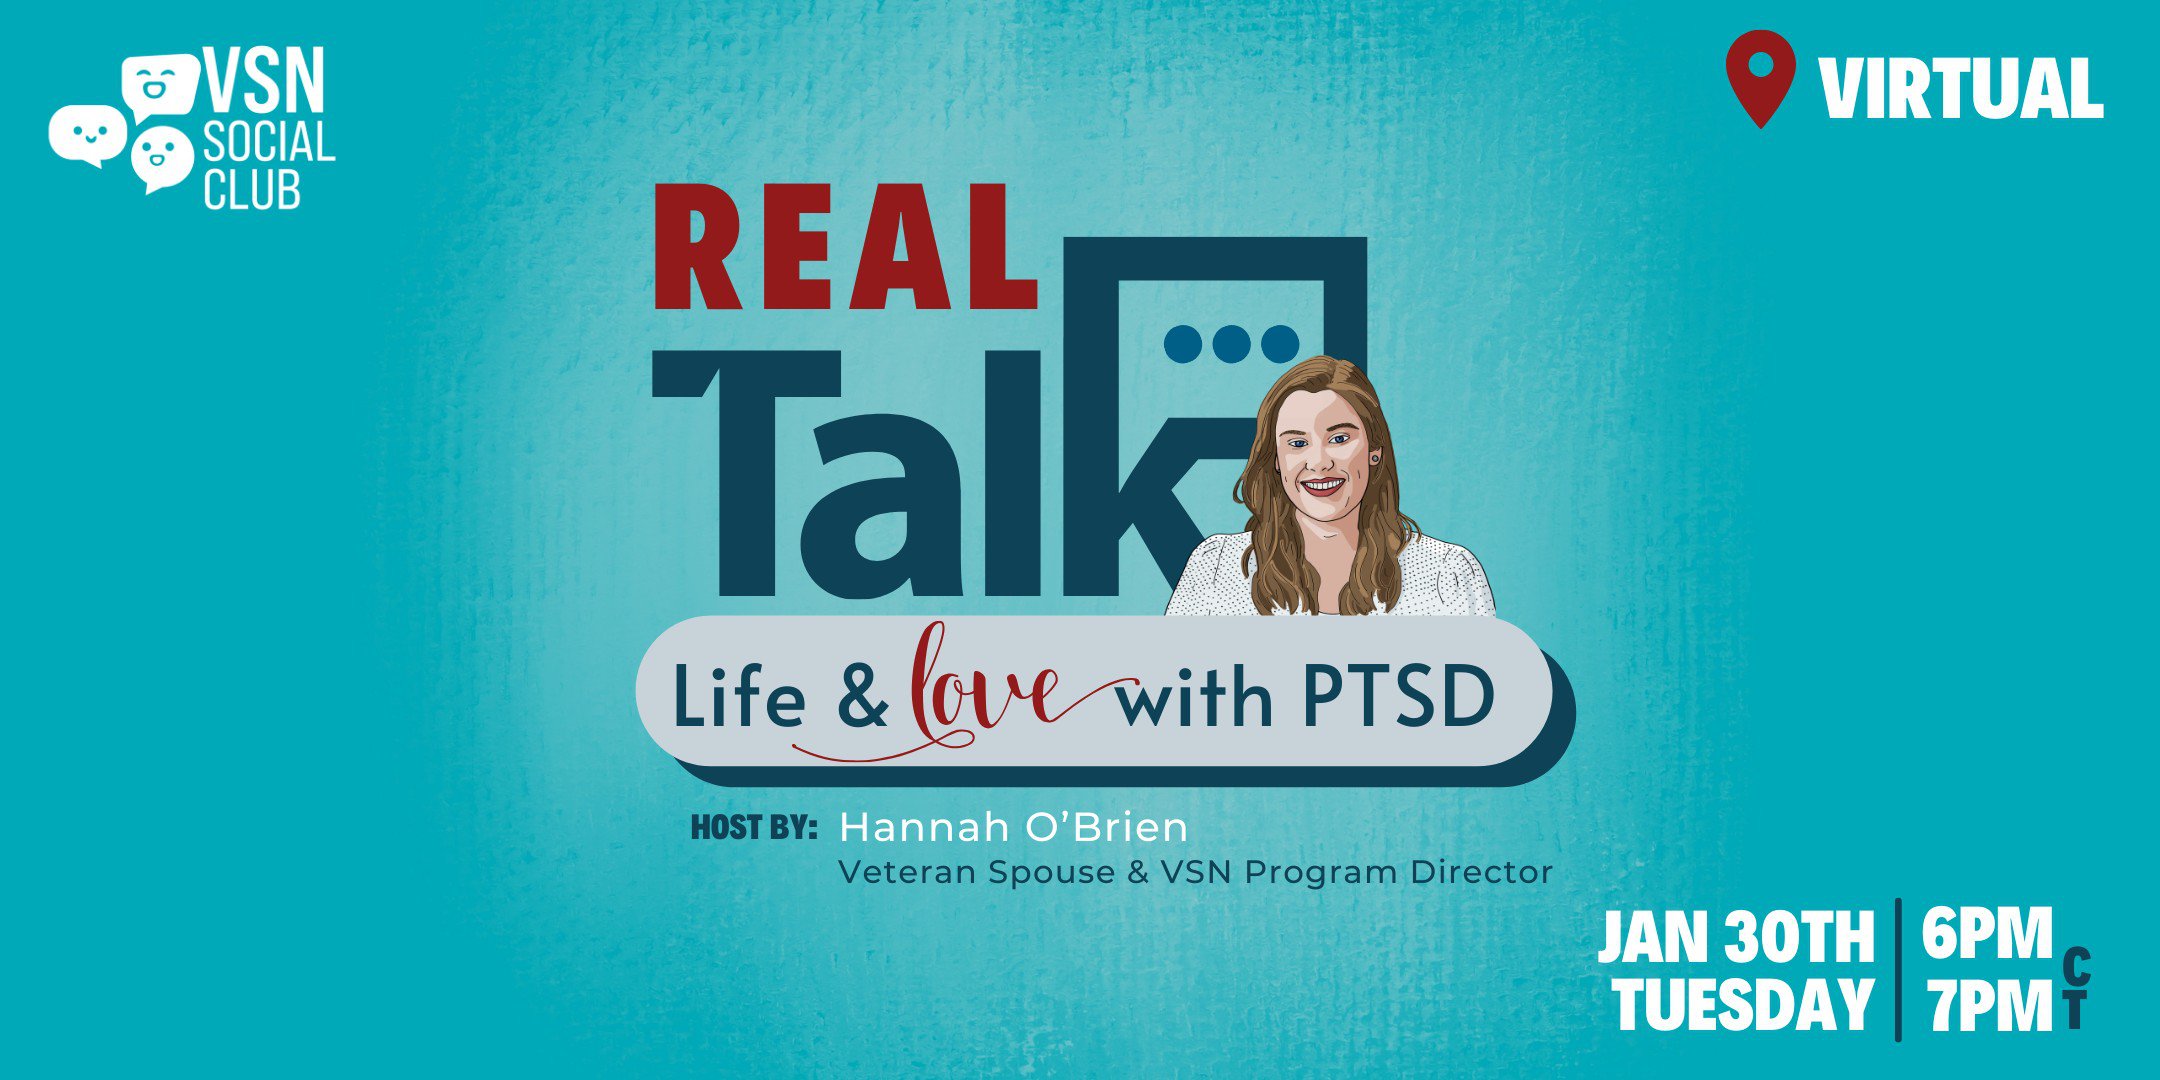 Real talk relationships with PTSD Monthly